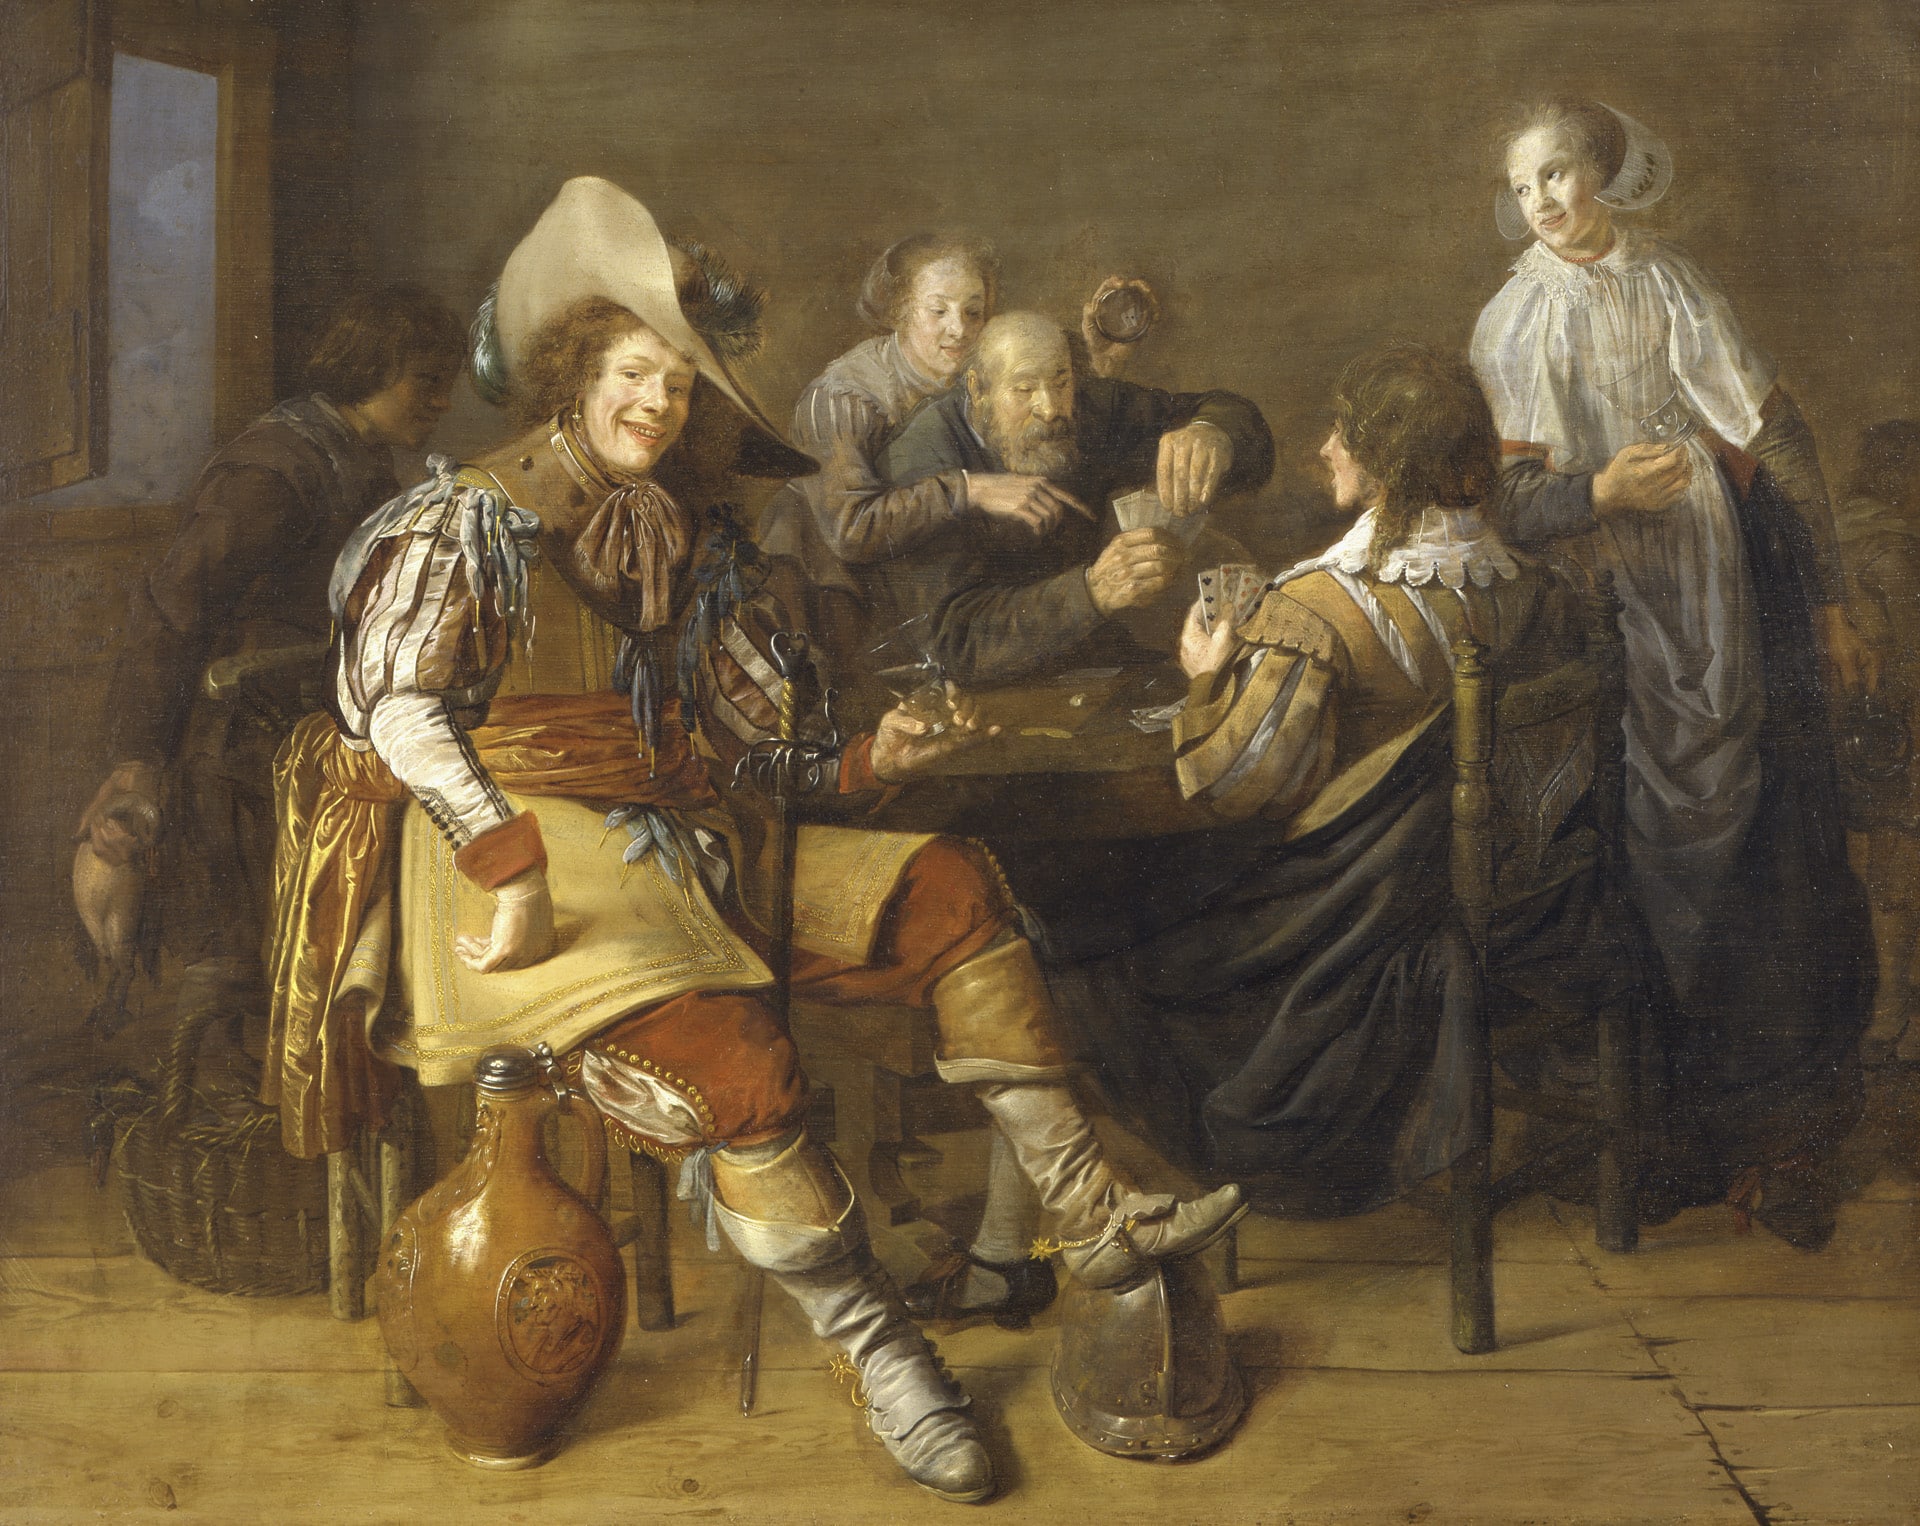 an interior of a tavern with men and women playing cards dressed in 17th century costume, one man looks out to the viewer with a smile